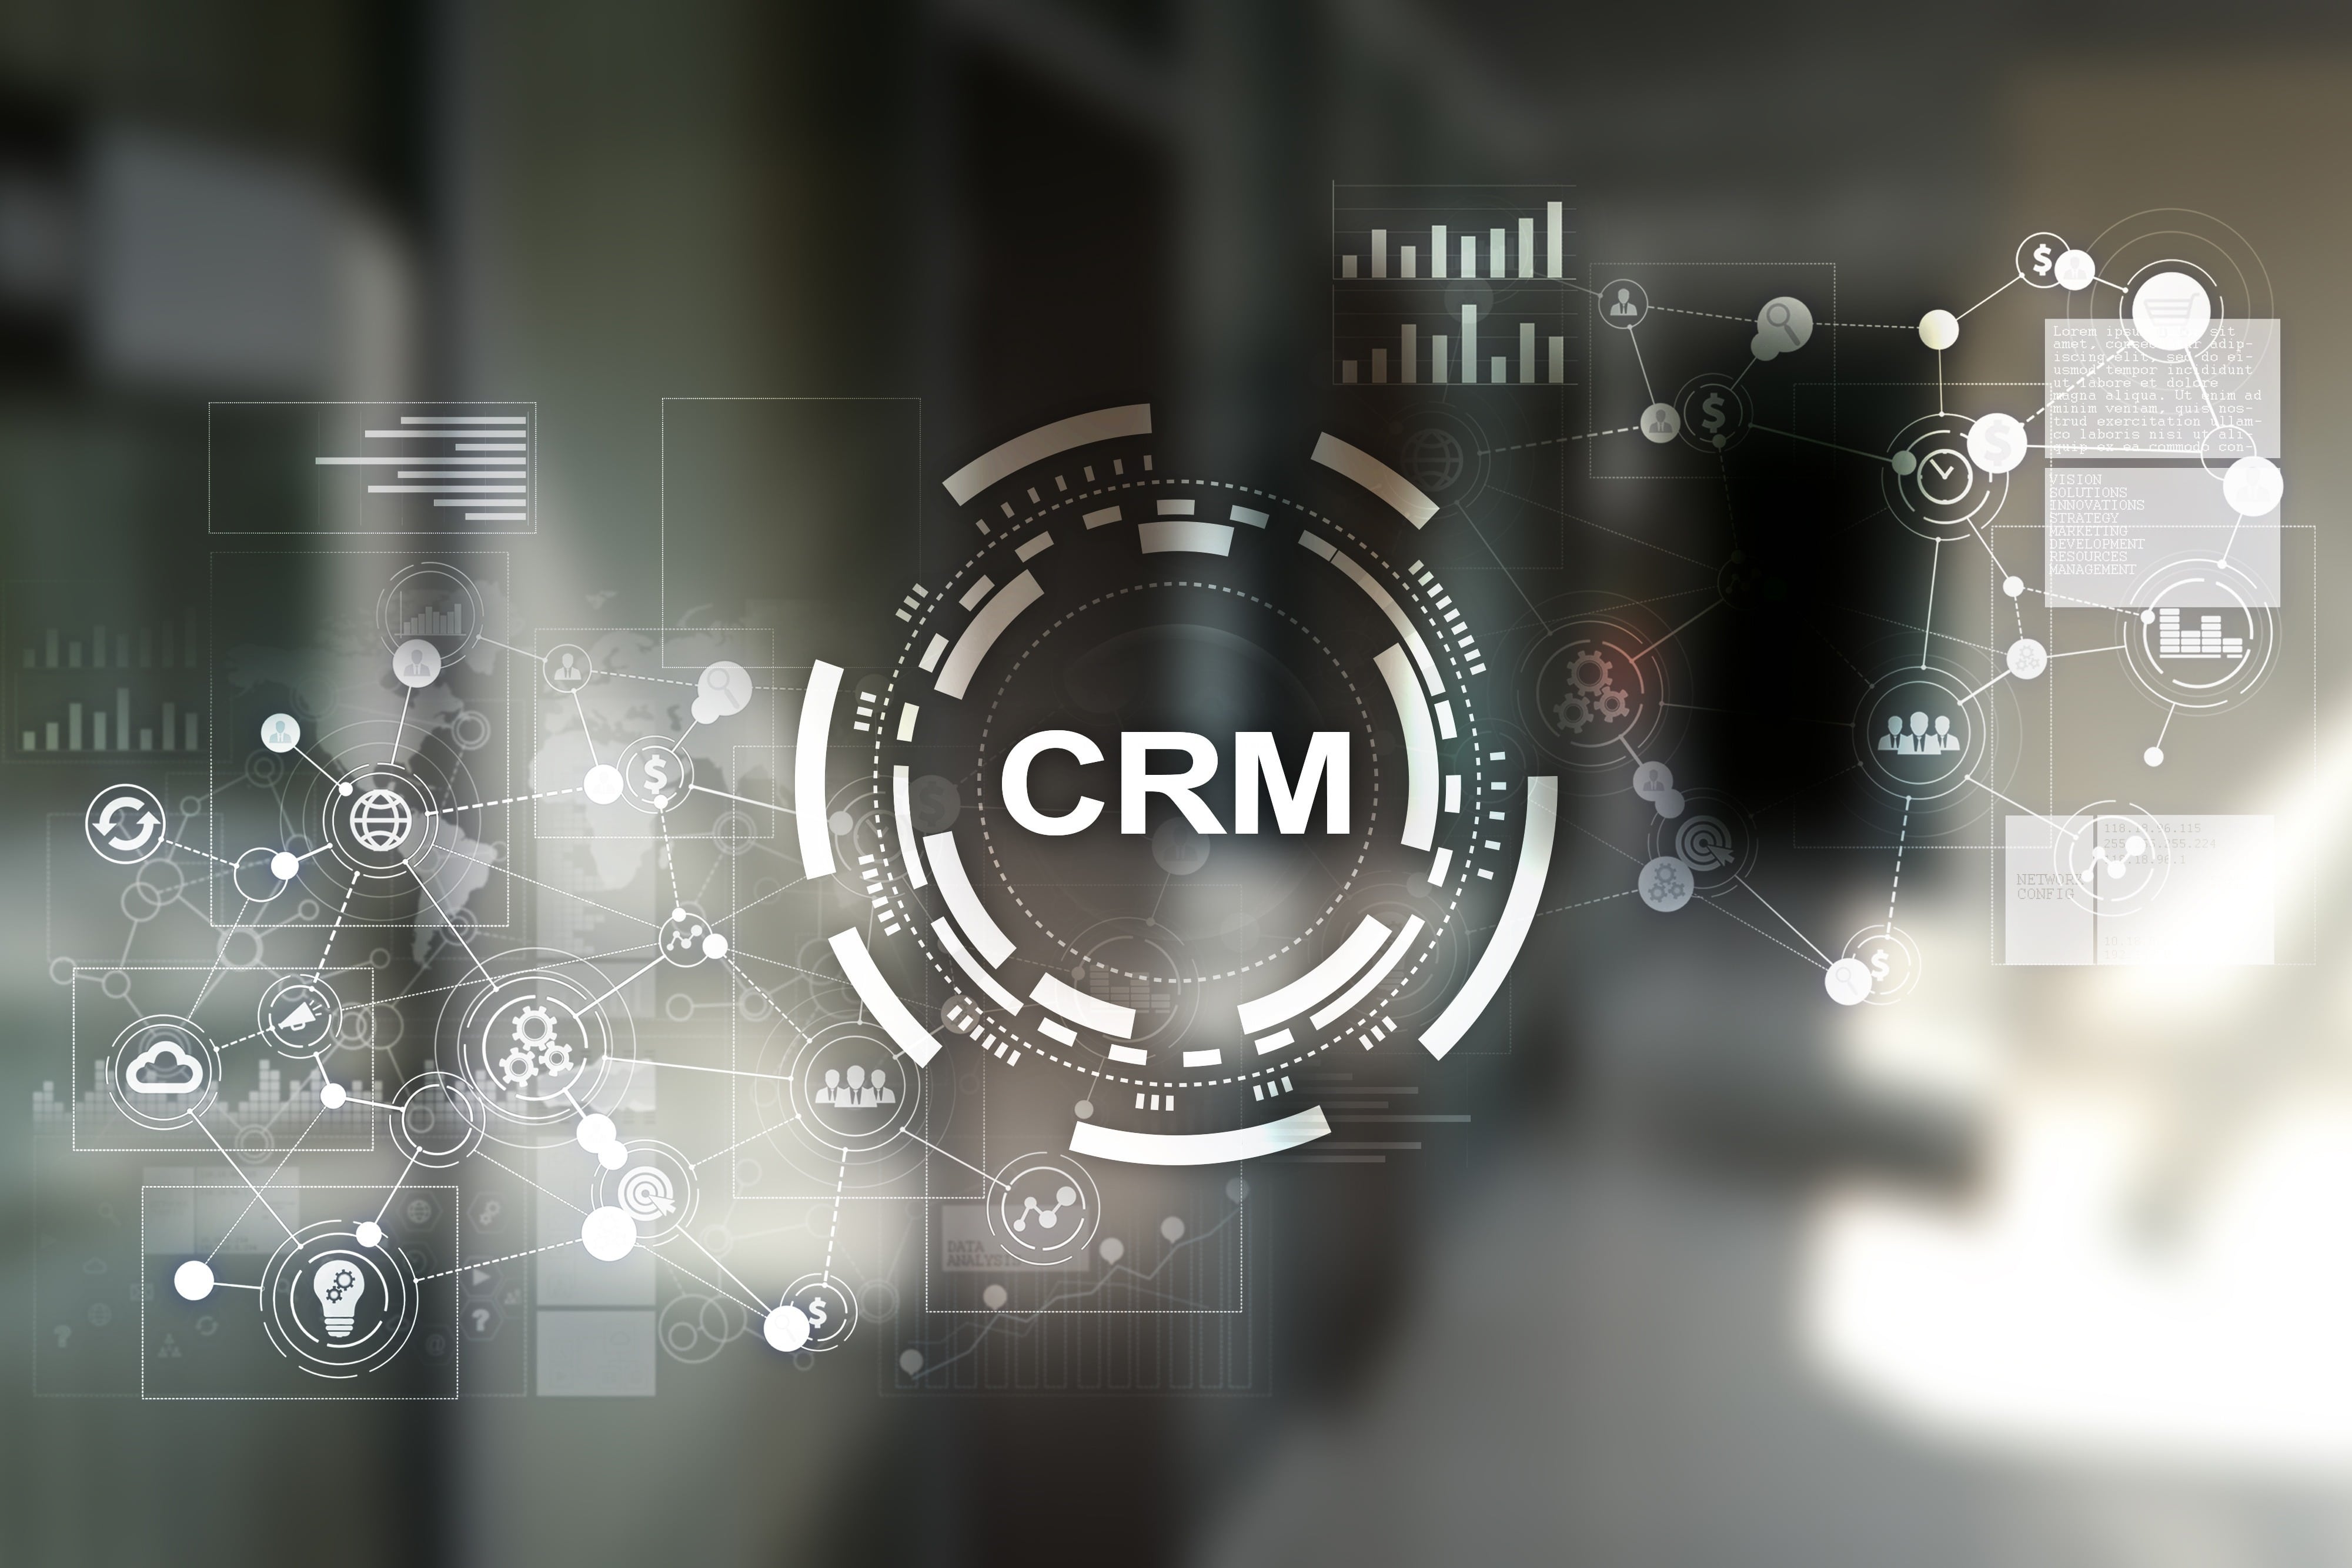 How does CRM complement ERP?